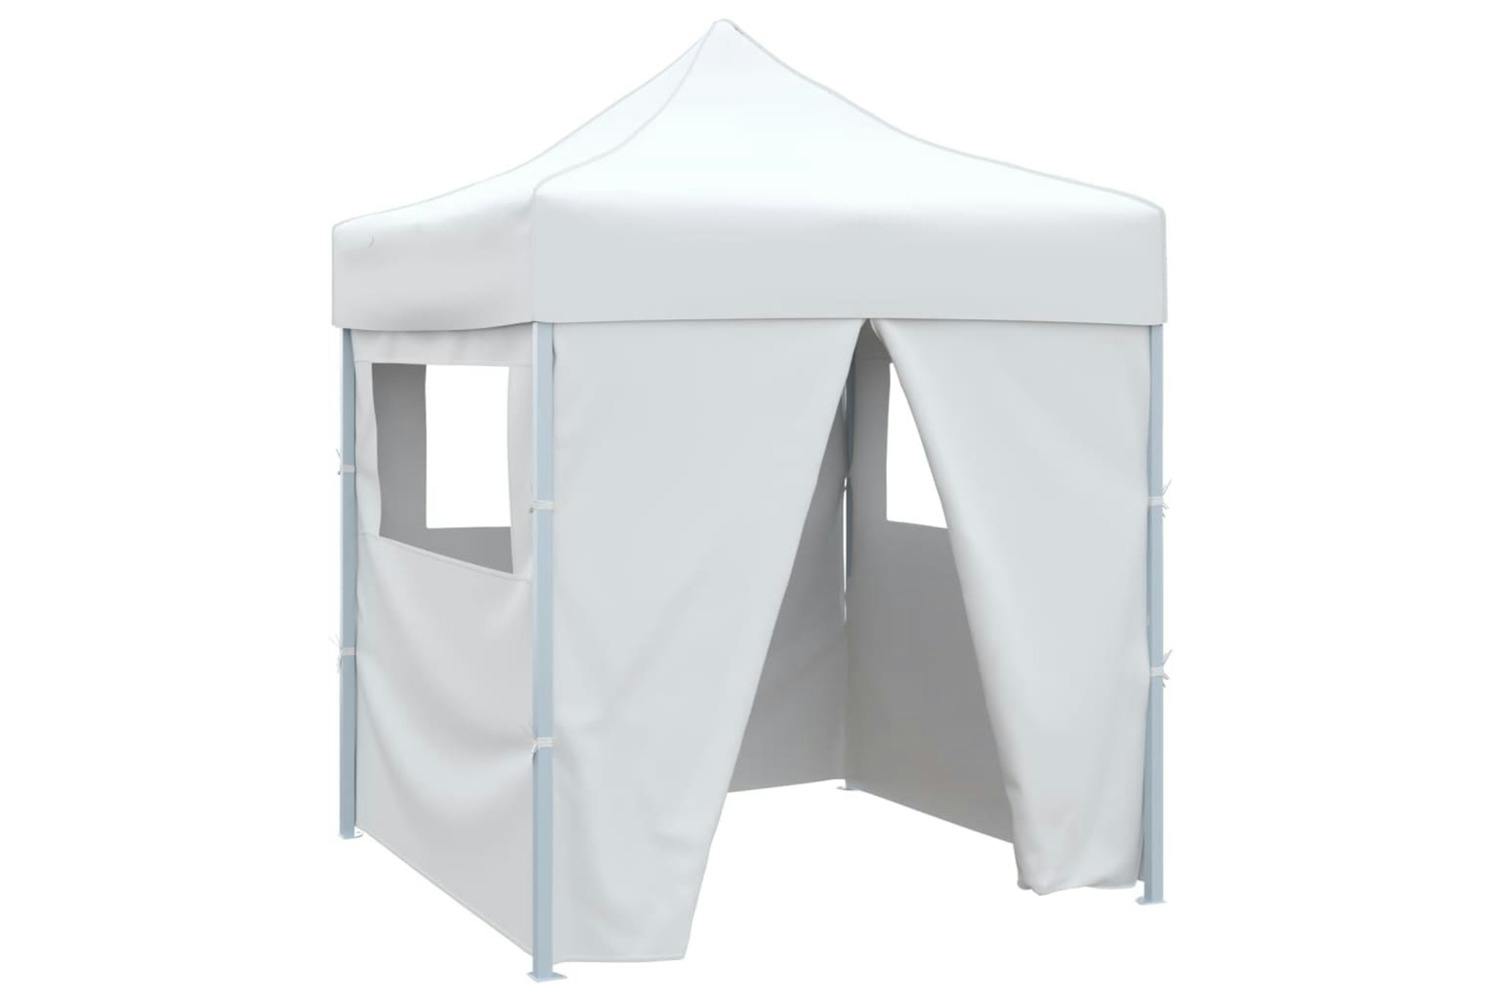 Vidaxl Professional Folding Party Tent With 4 Sidewalls 2x2 M Steel White